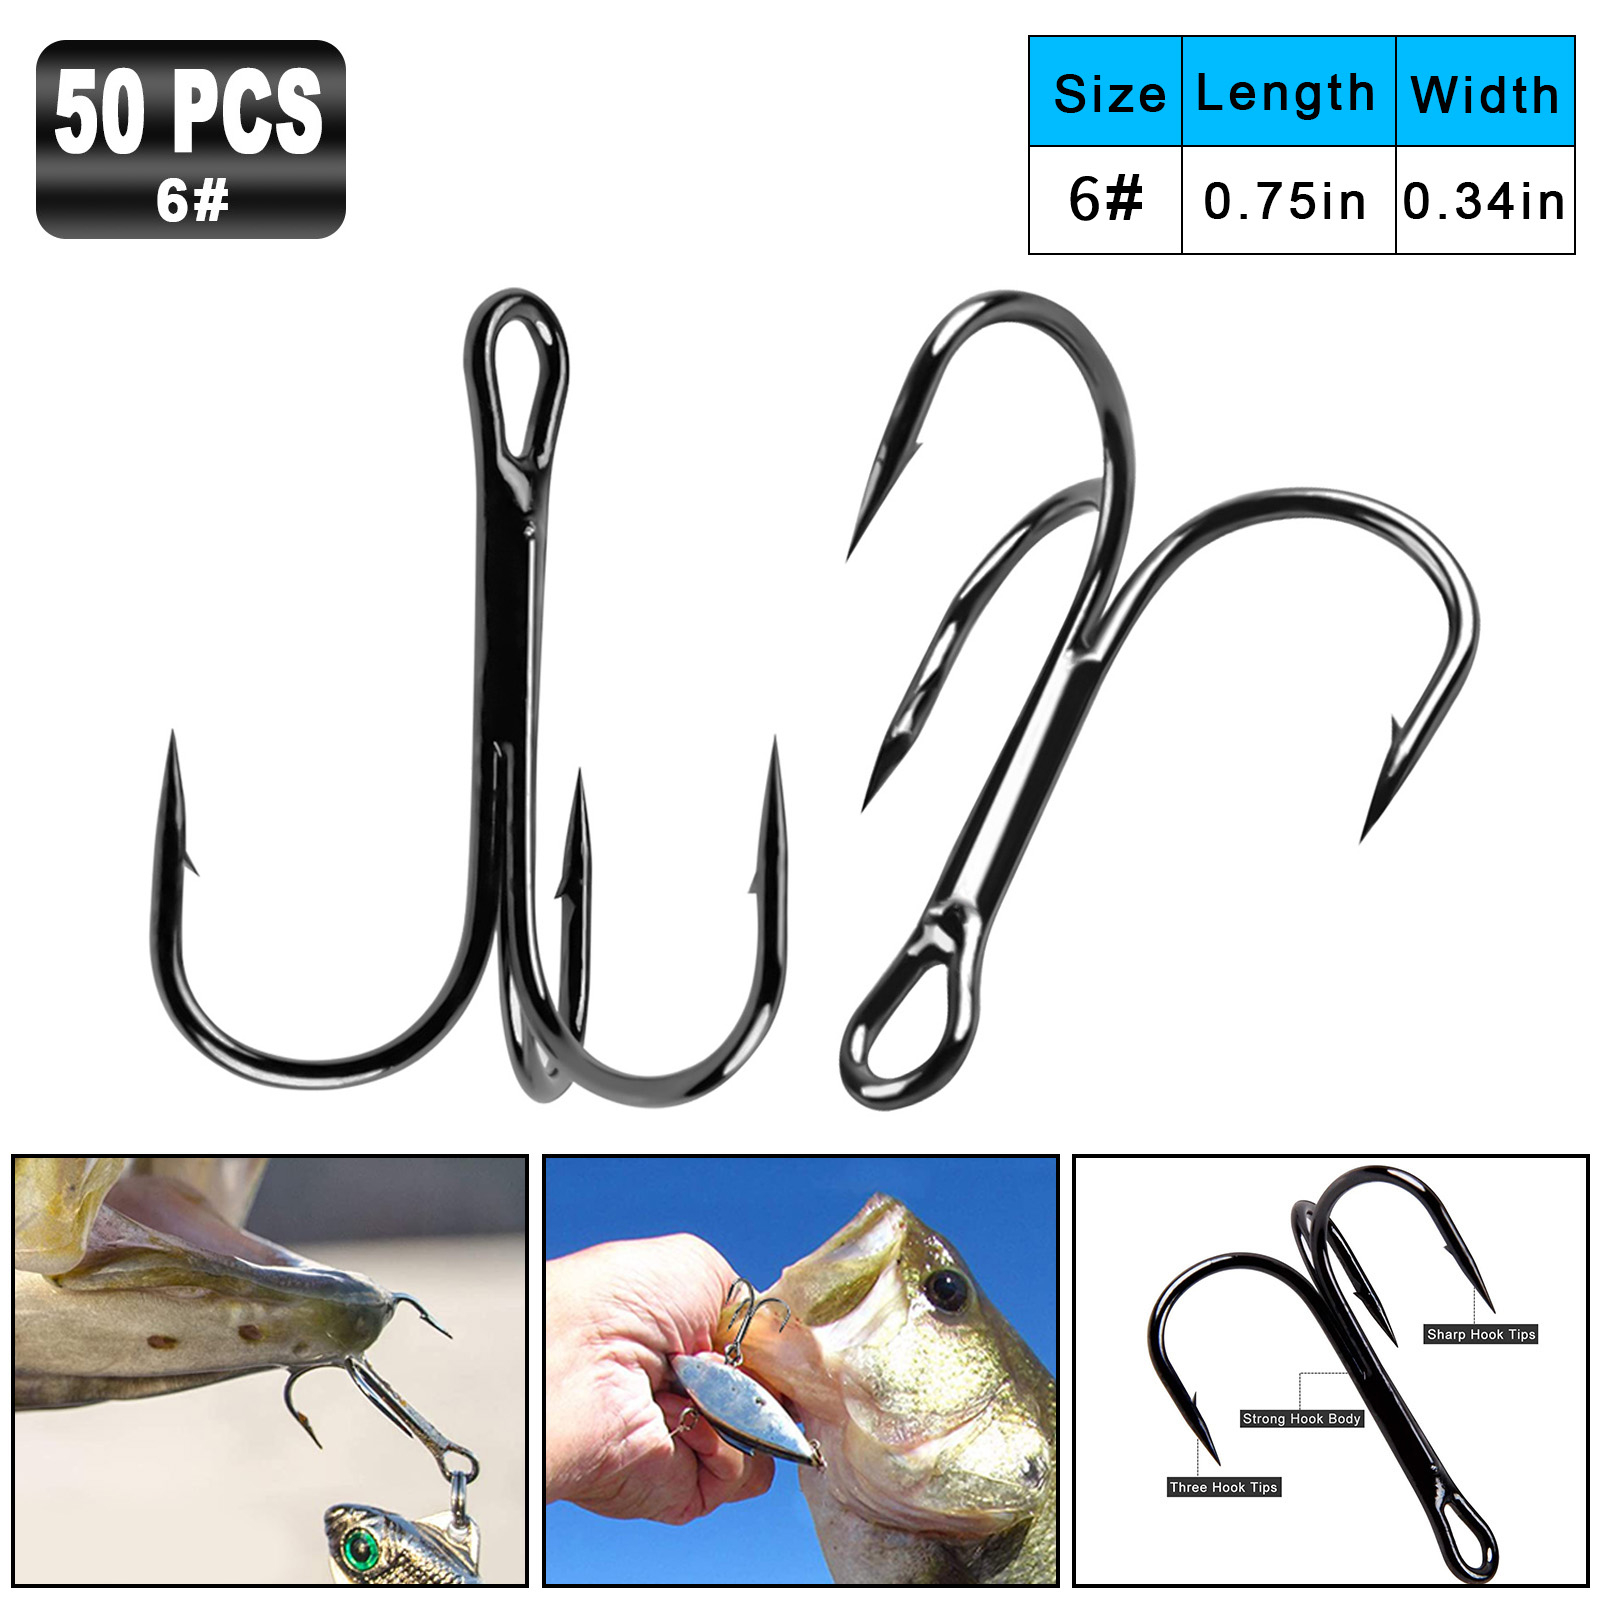 50 Pcs High Carbon Steel Treble Hooks,Treble Fishing Hooks Kit,Fishing Hooks,Treble Hook,Pike Fish Hook,With Fishing Tackle Box,Suitable For Lake Fishing,River Fishing,Sea Fishing 